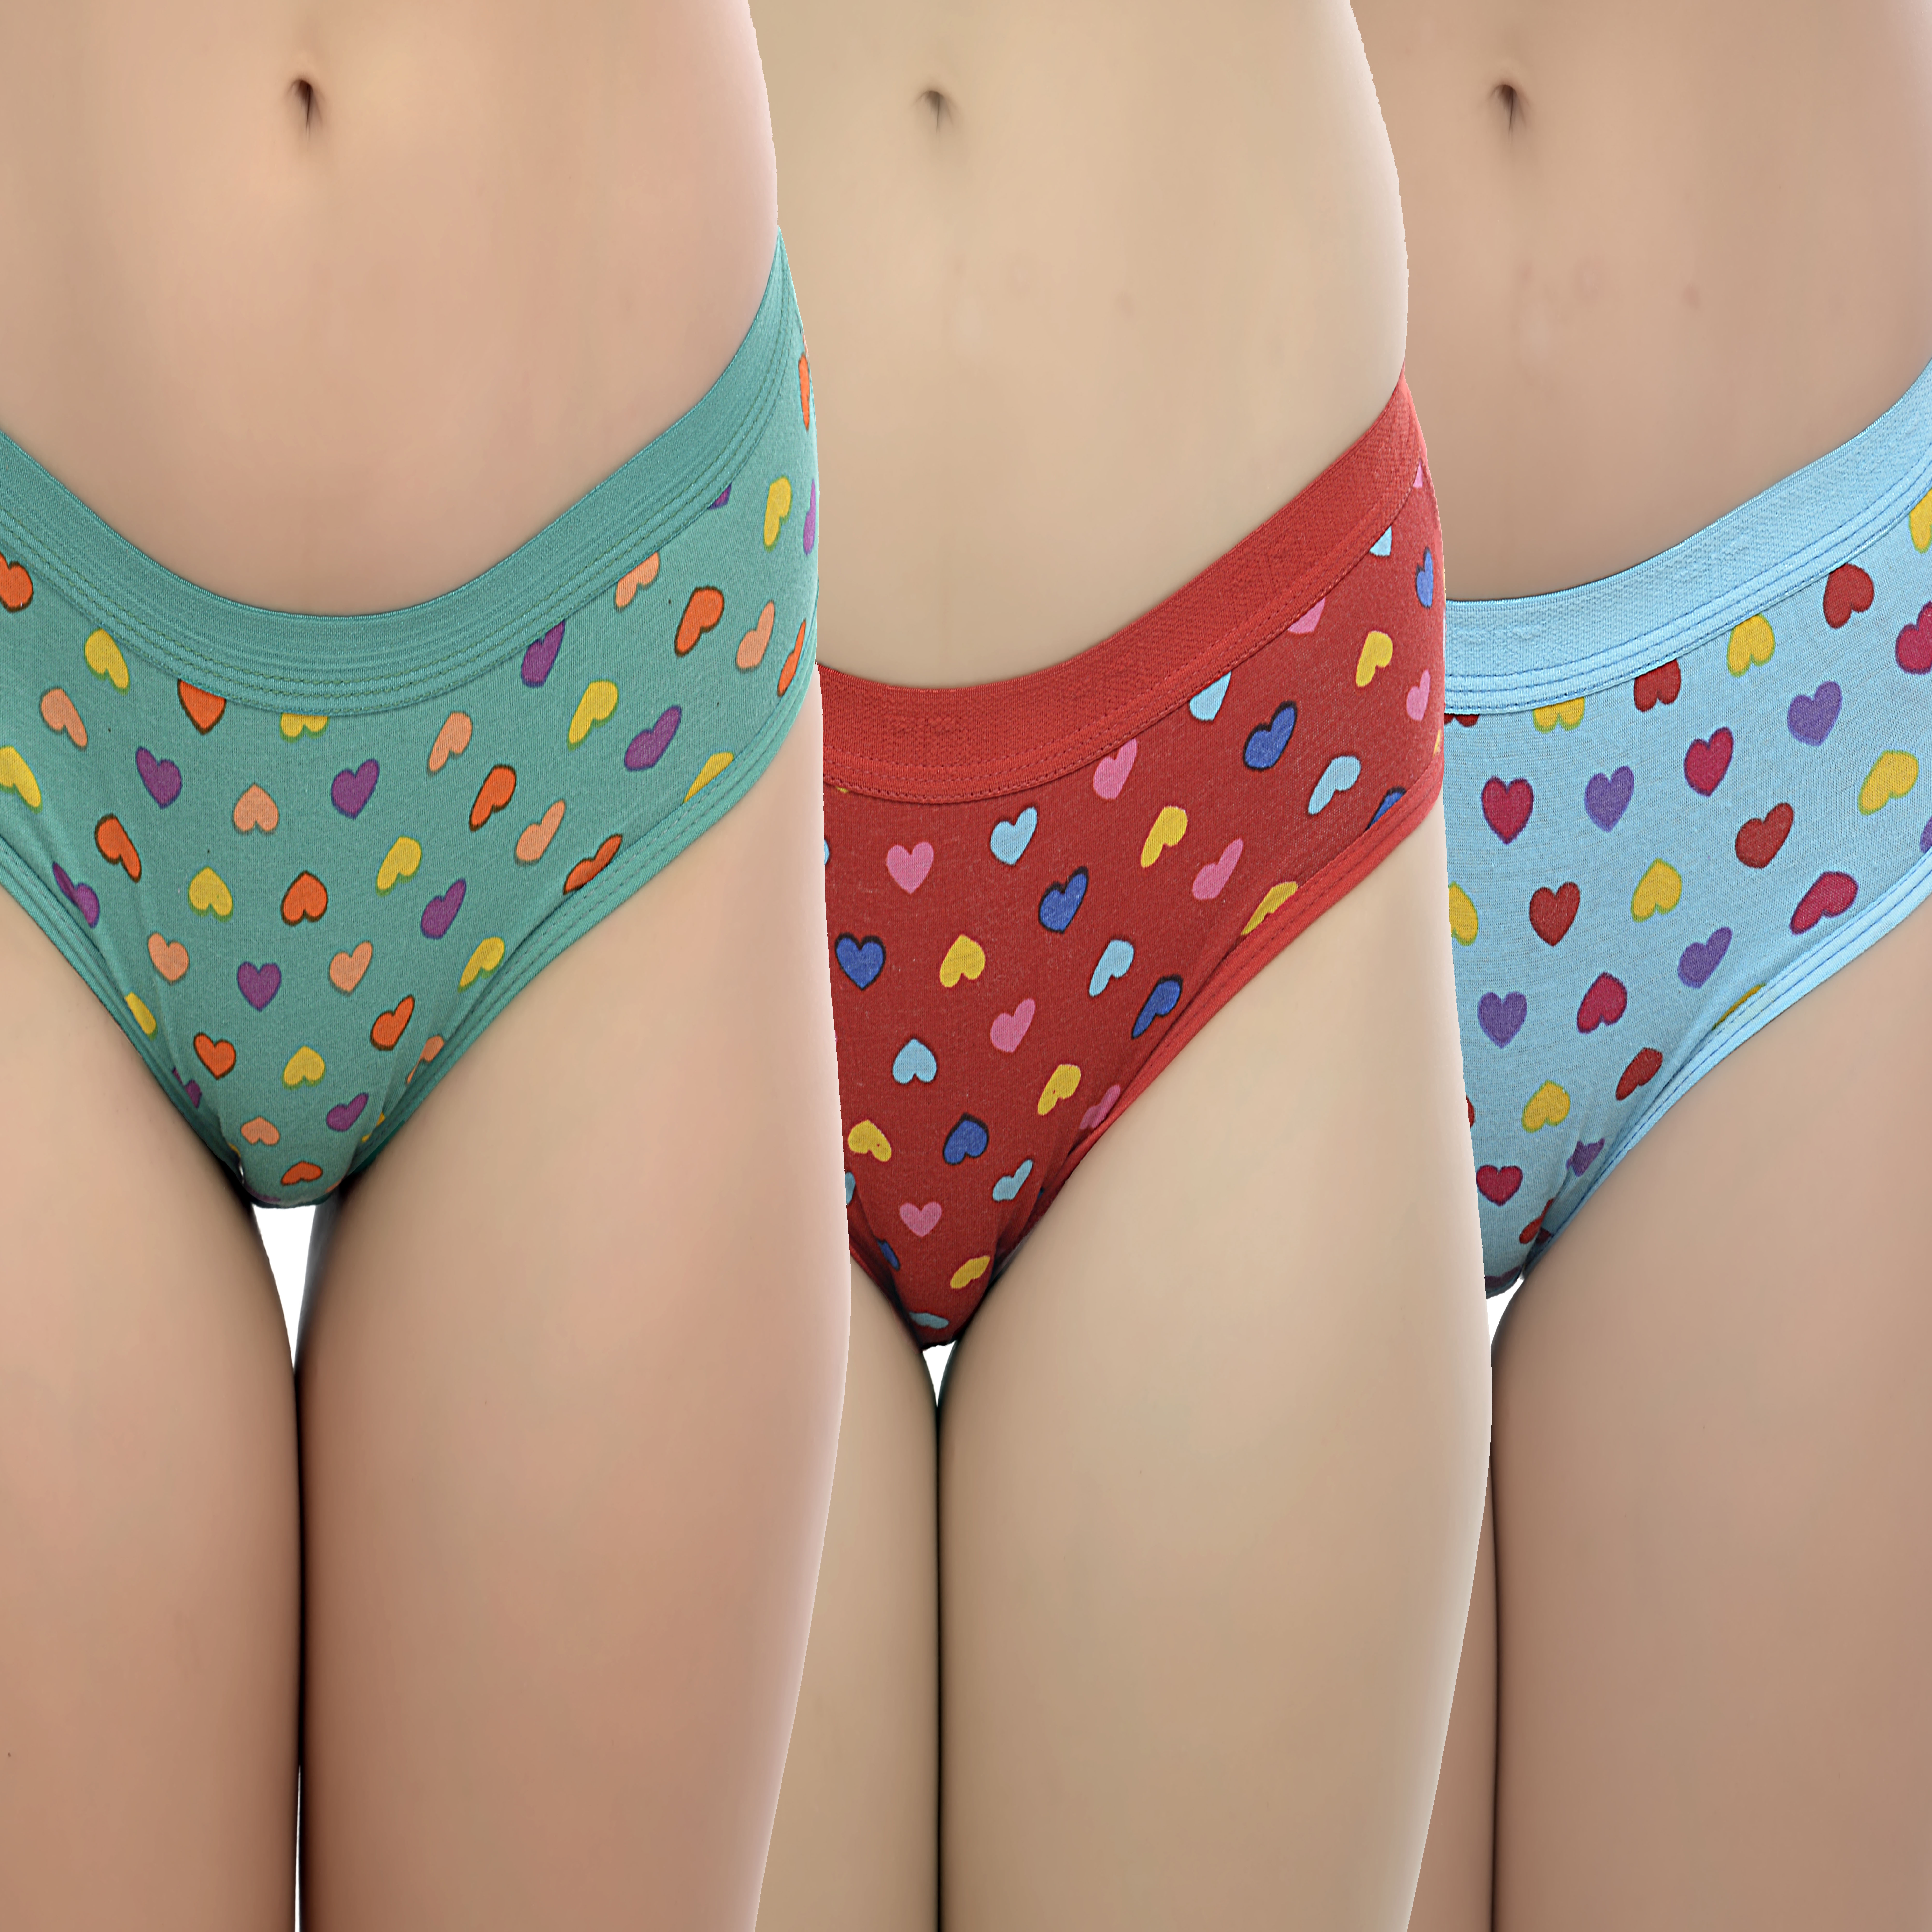 KAMMY FASHIONABLES | Kammy Fashionables Red, Green & Blue Colour Soft Cotton Printed Panties (Set of 3 Panties)